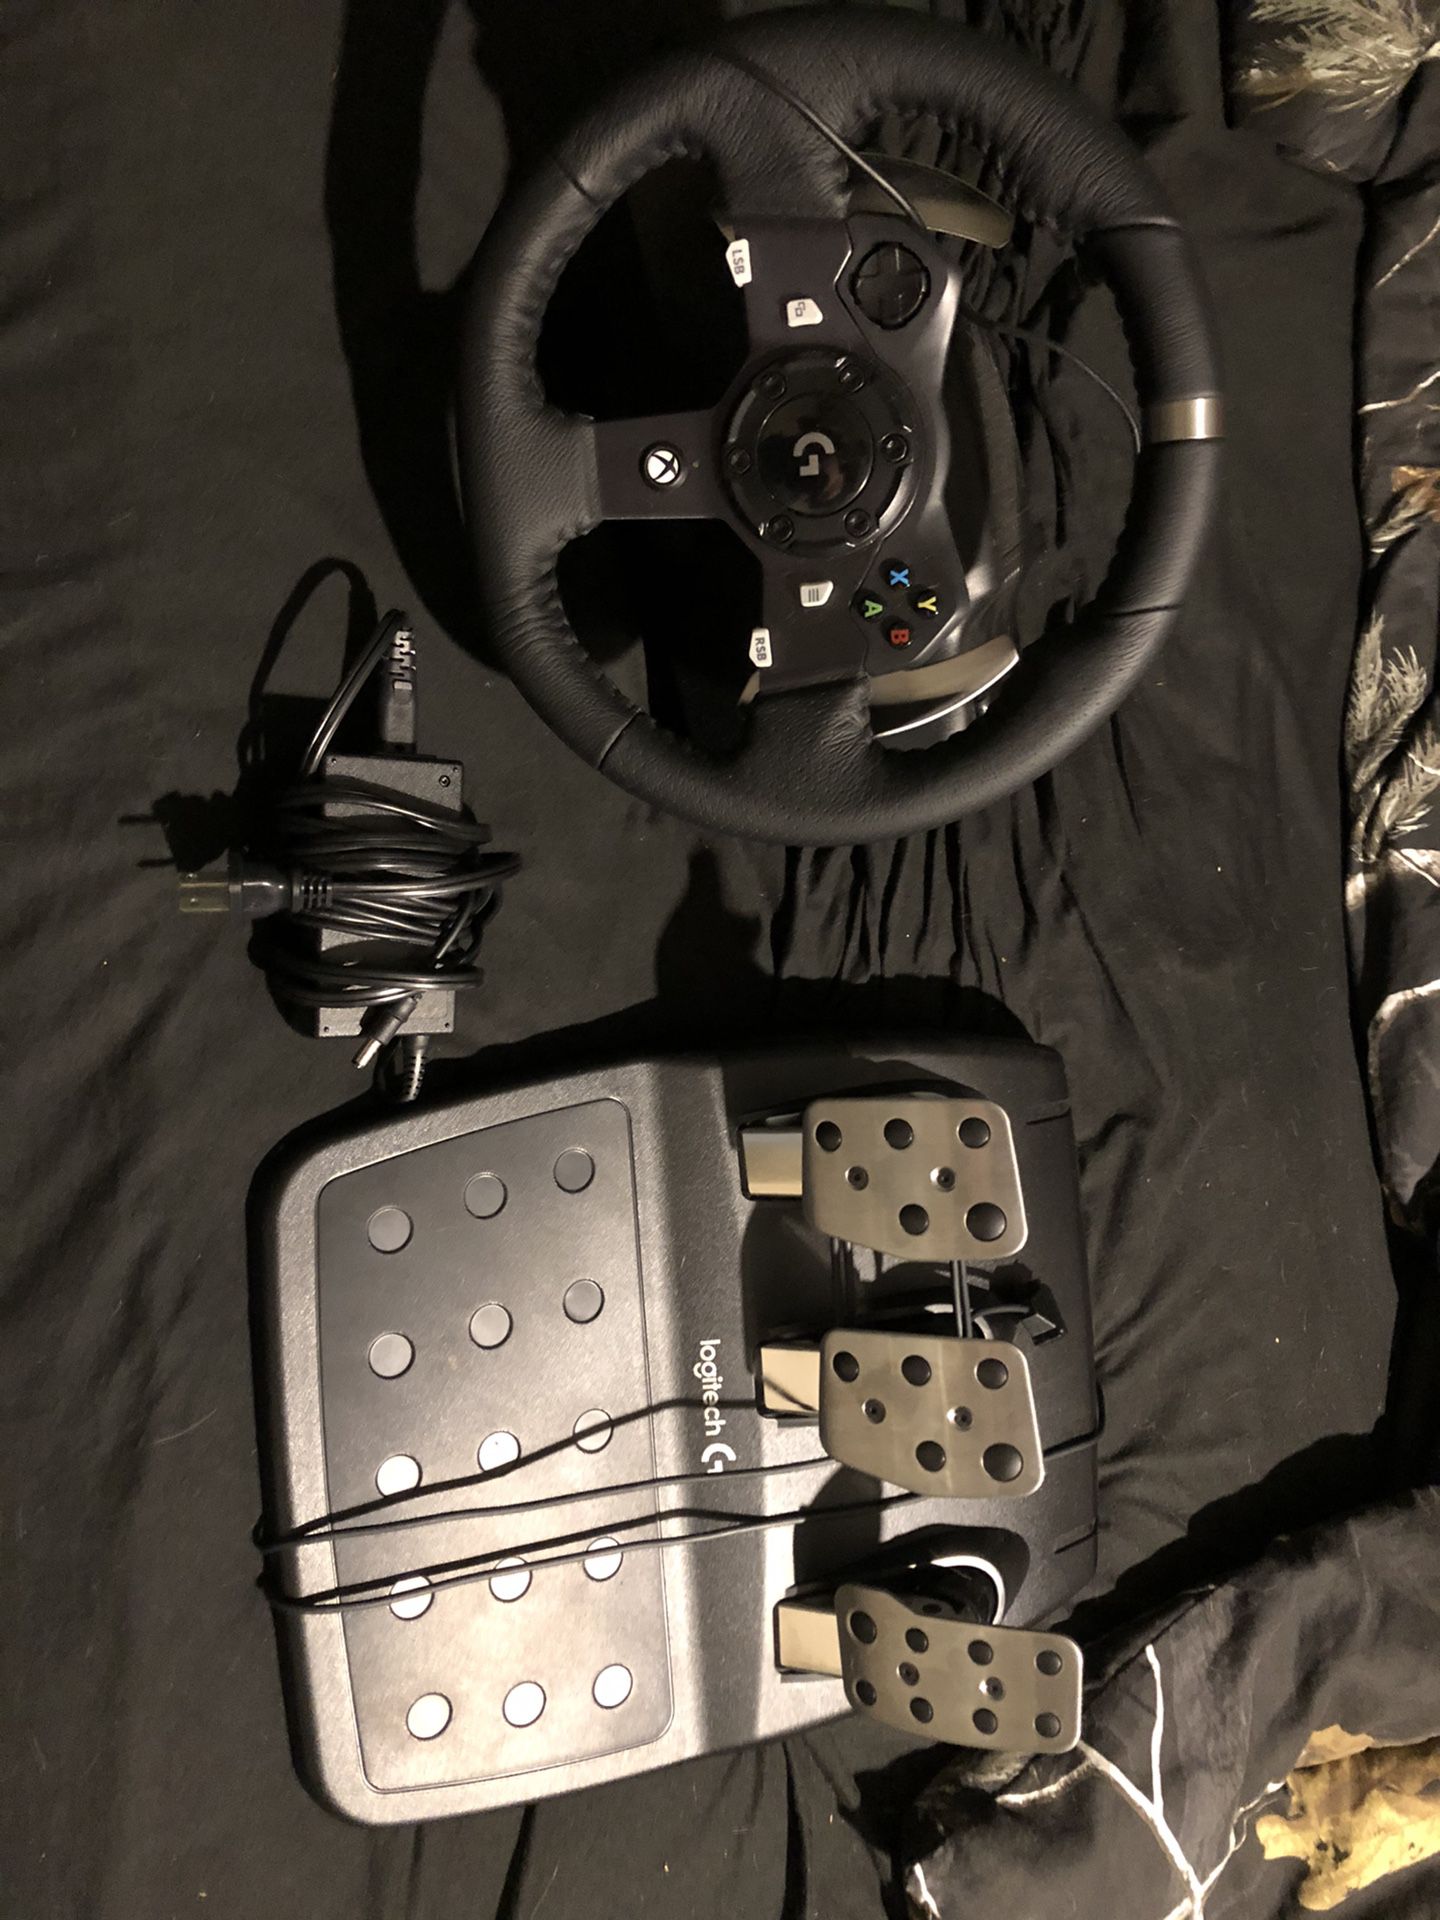 Logitech G920 driving force racing wheel and pedal